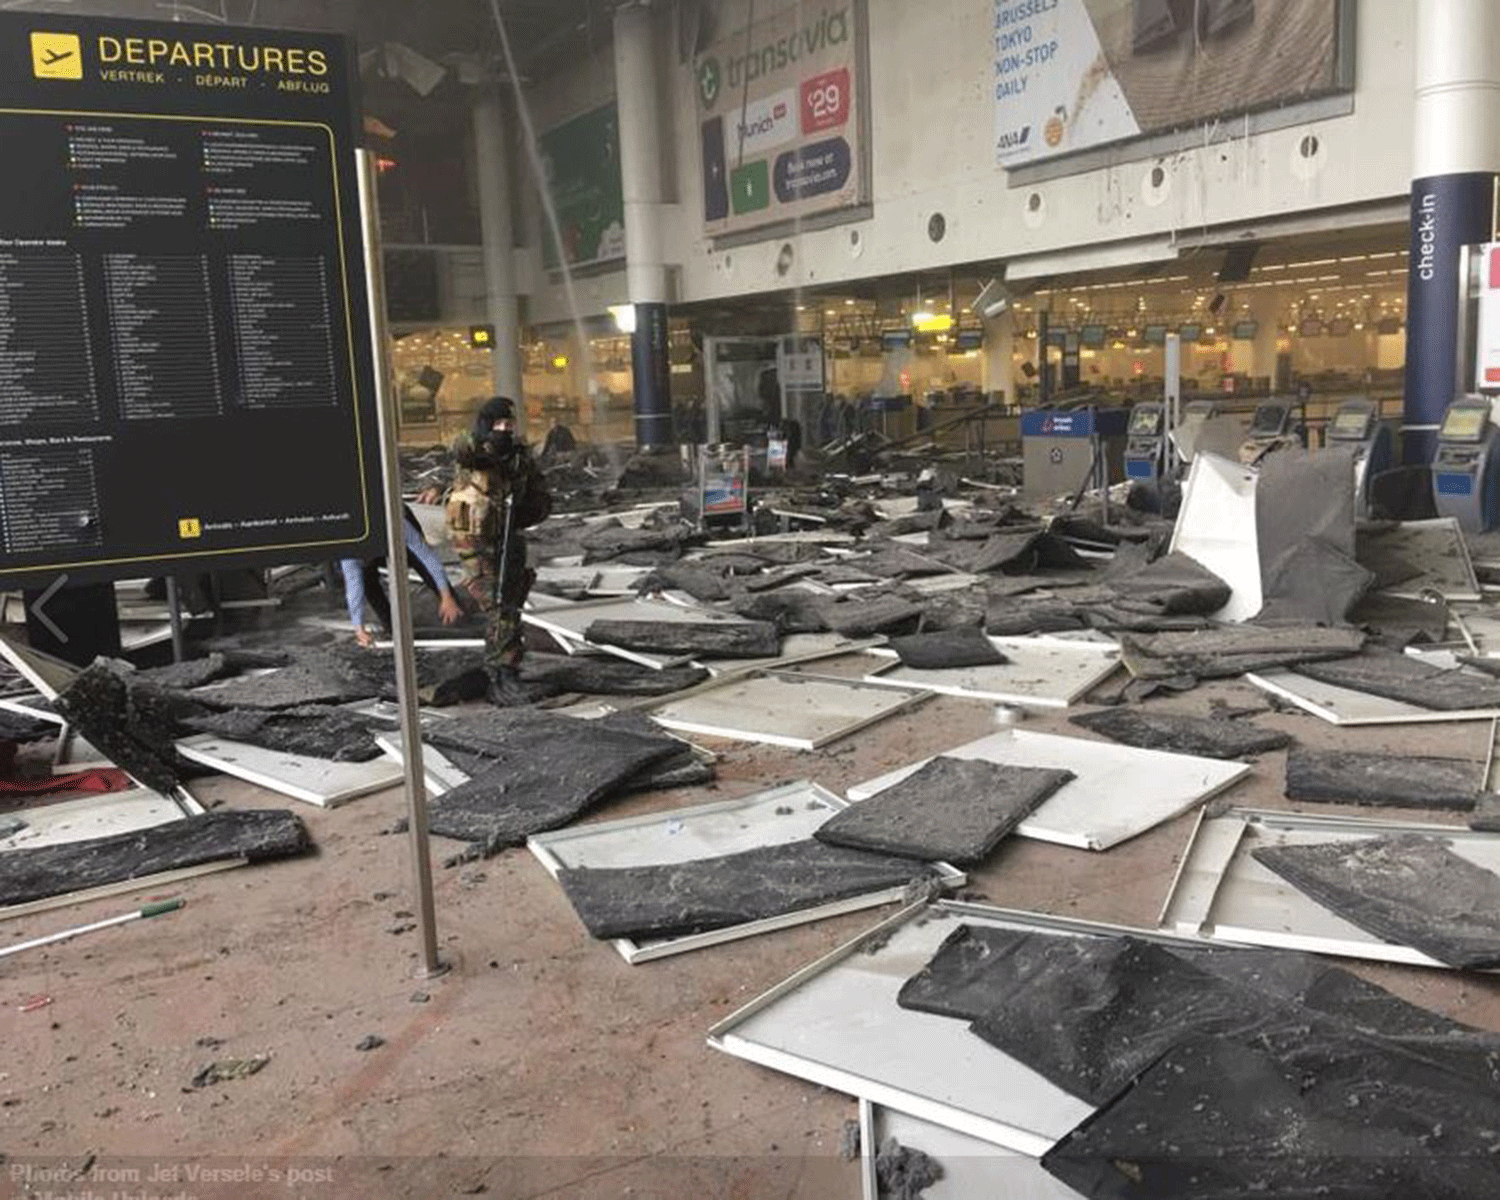 The explosion reportedly took place in the Departures lounge, beyond airport security areas.